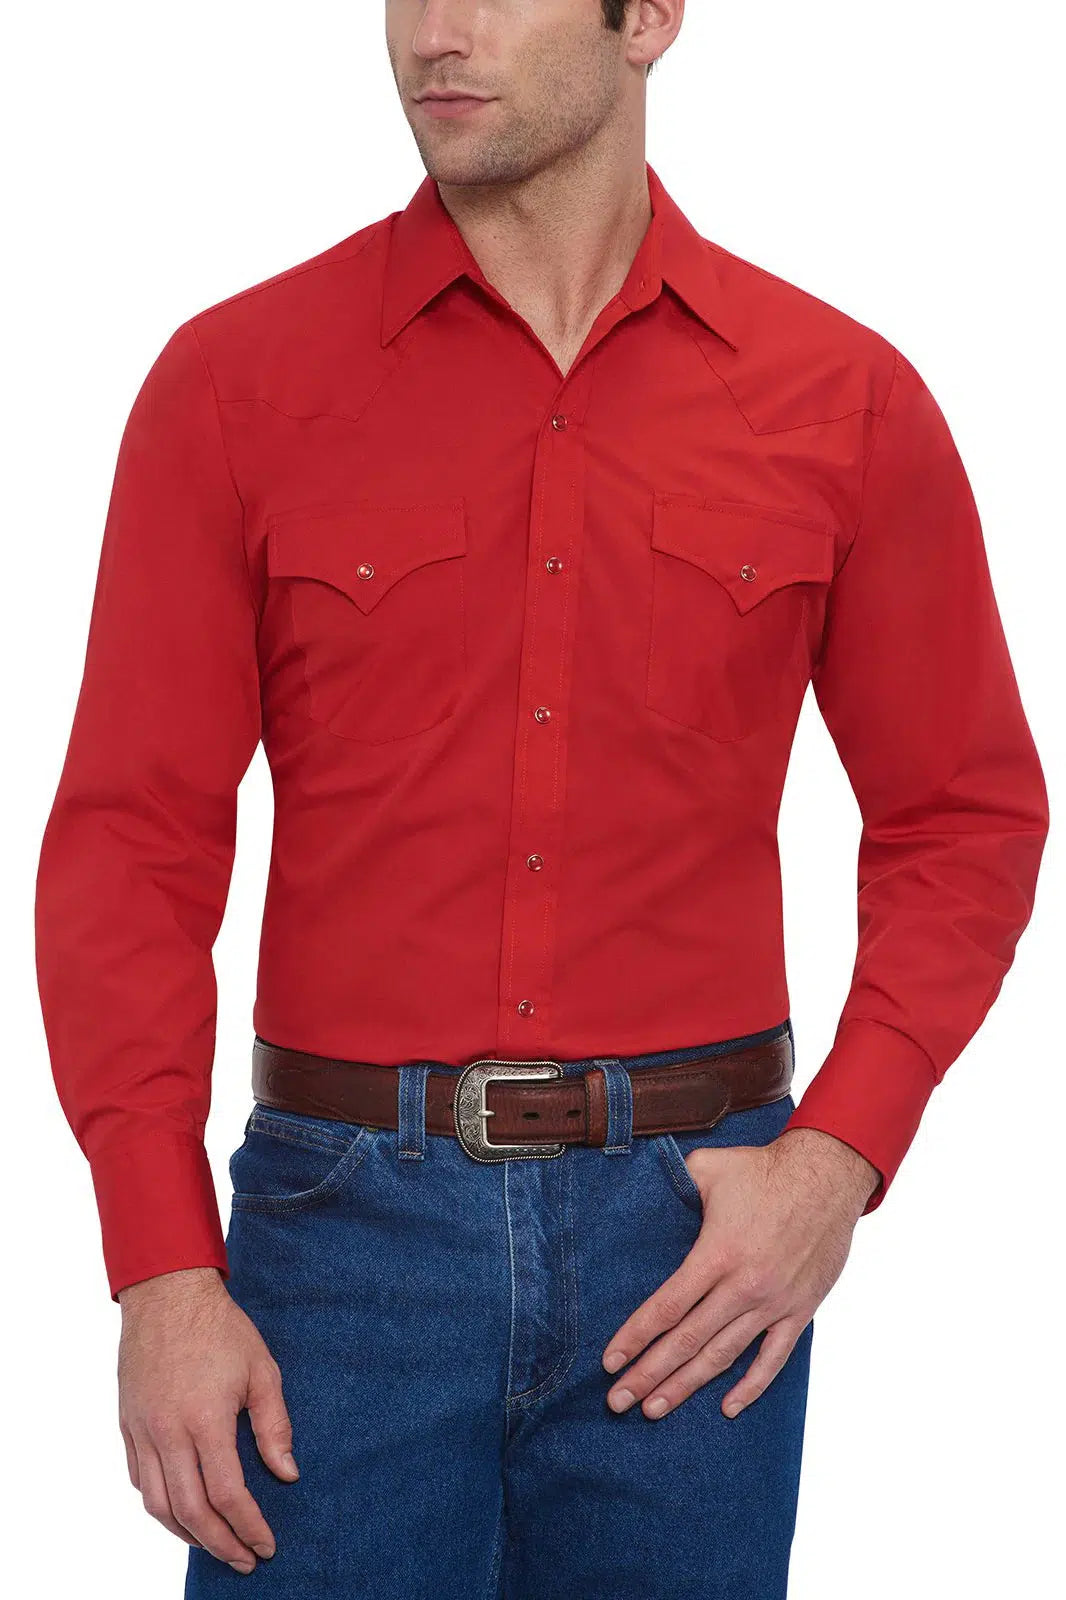 A man wearing a red ELY long sleeve western shirt and jeans.